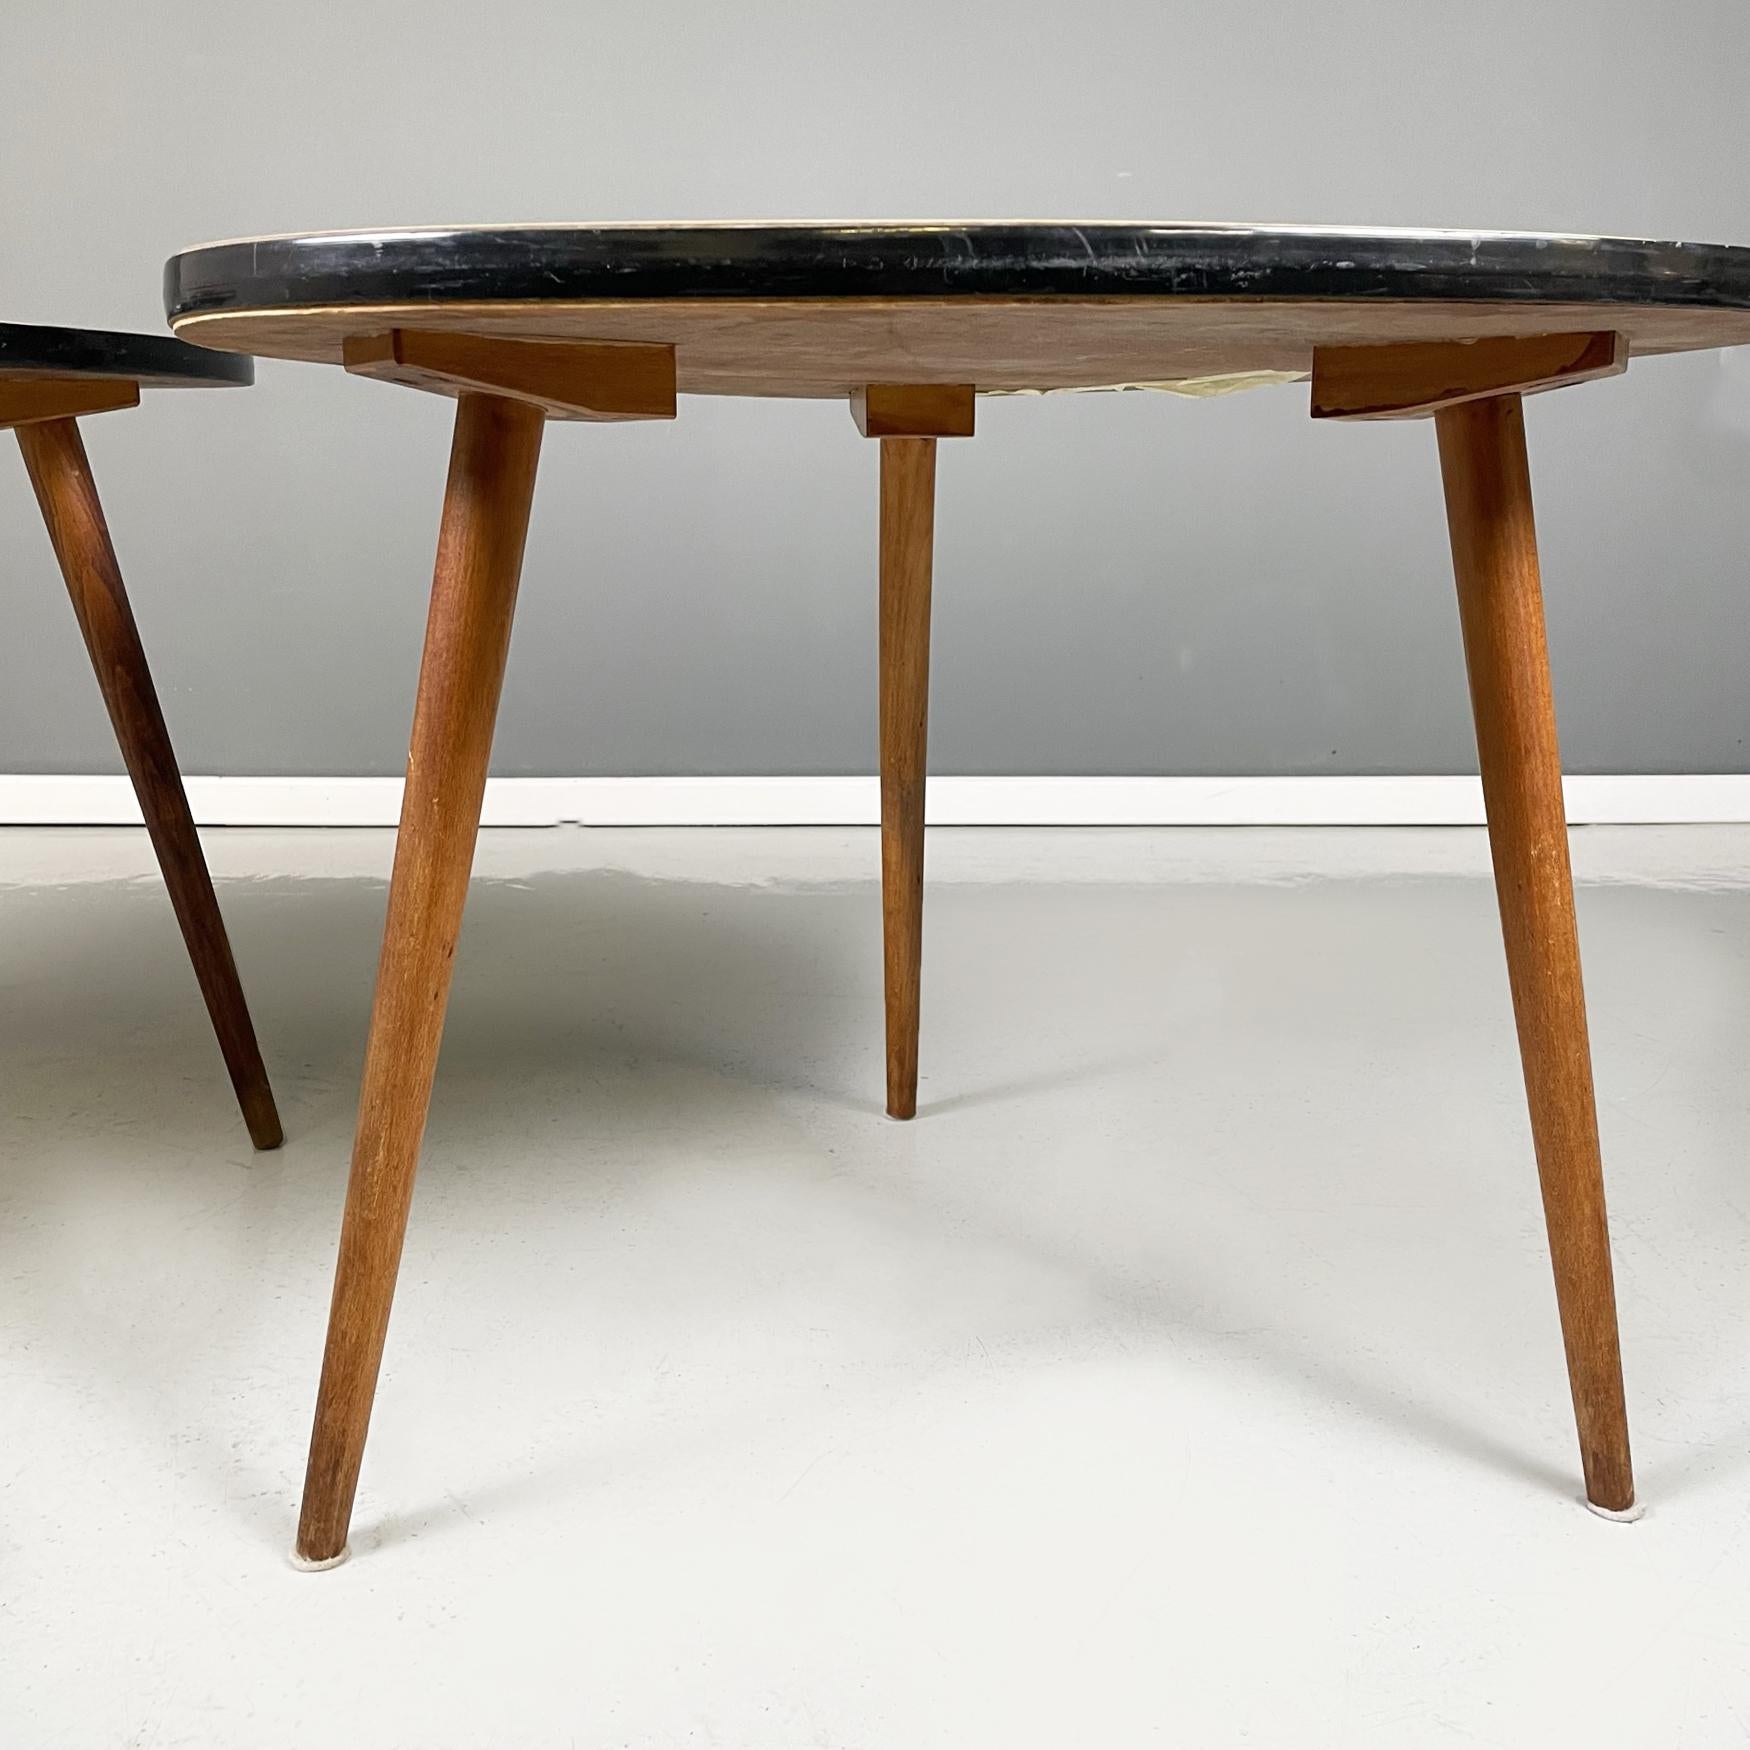 Northern European Midcentury Wood Yellow and Black Formica Coffee Tables, 1960s For Sale 5